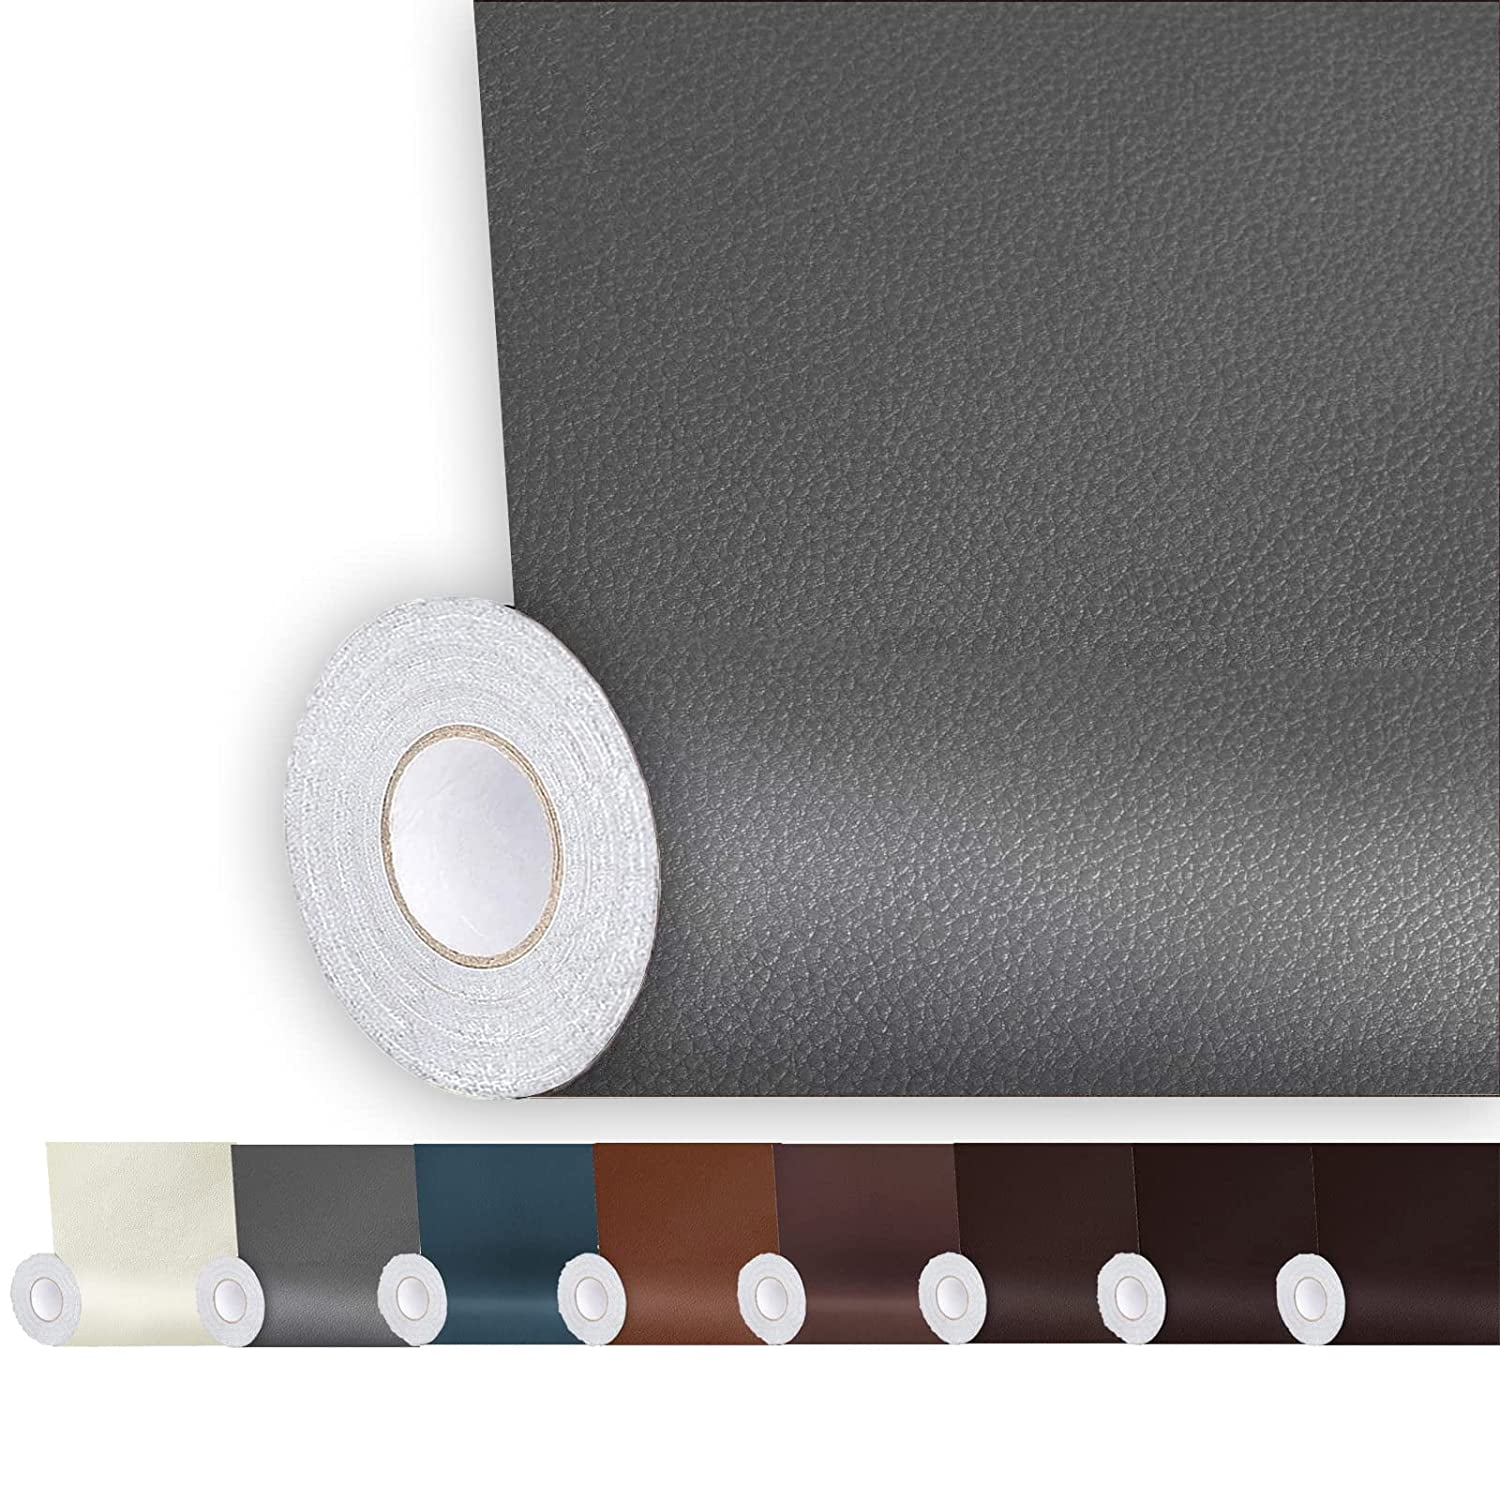 Bonded Leather Repair Patch Tape 3x60 Inch, High Strength Self